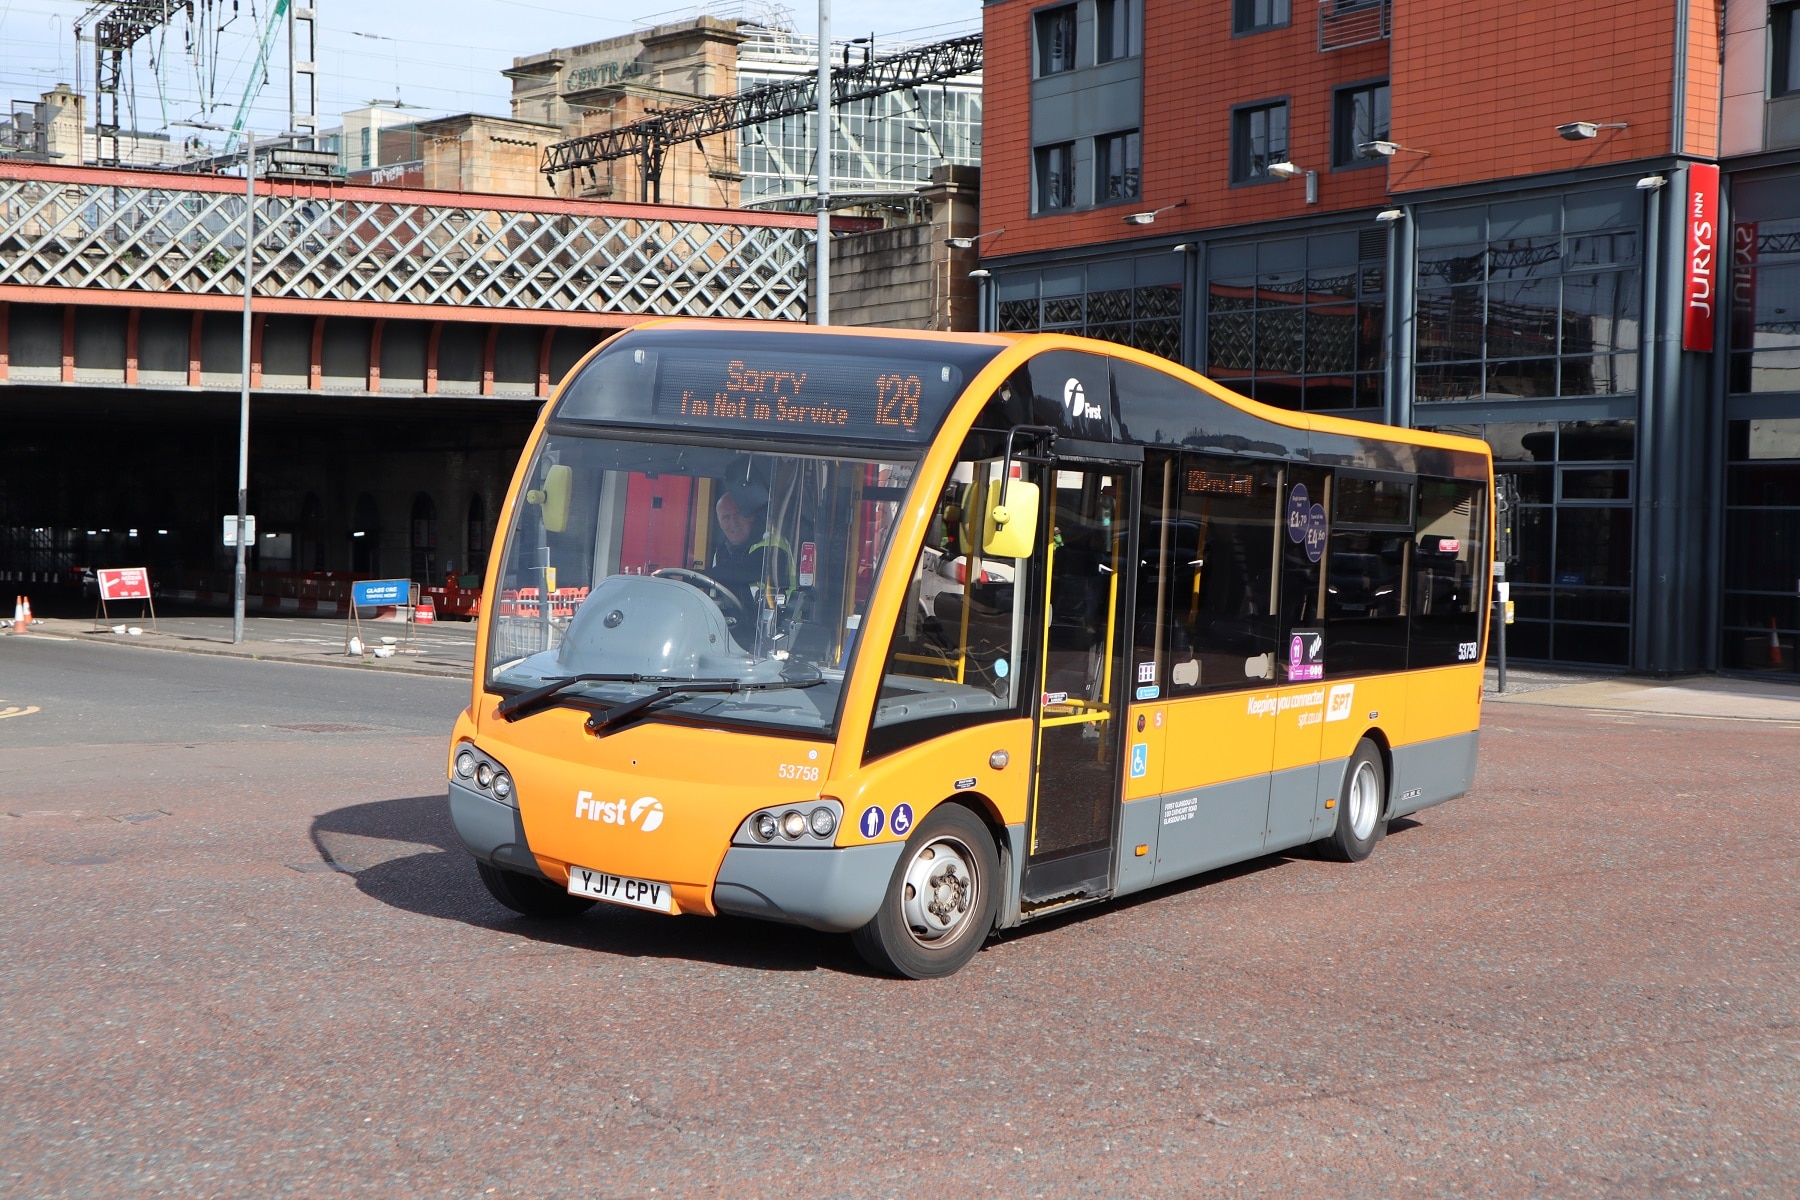 Bus Taskforce for Scotland called for by SPT